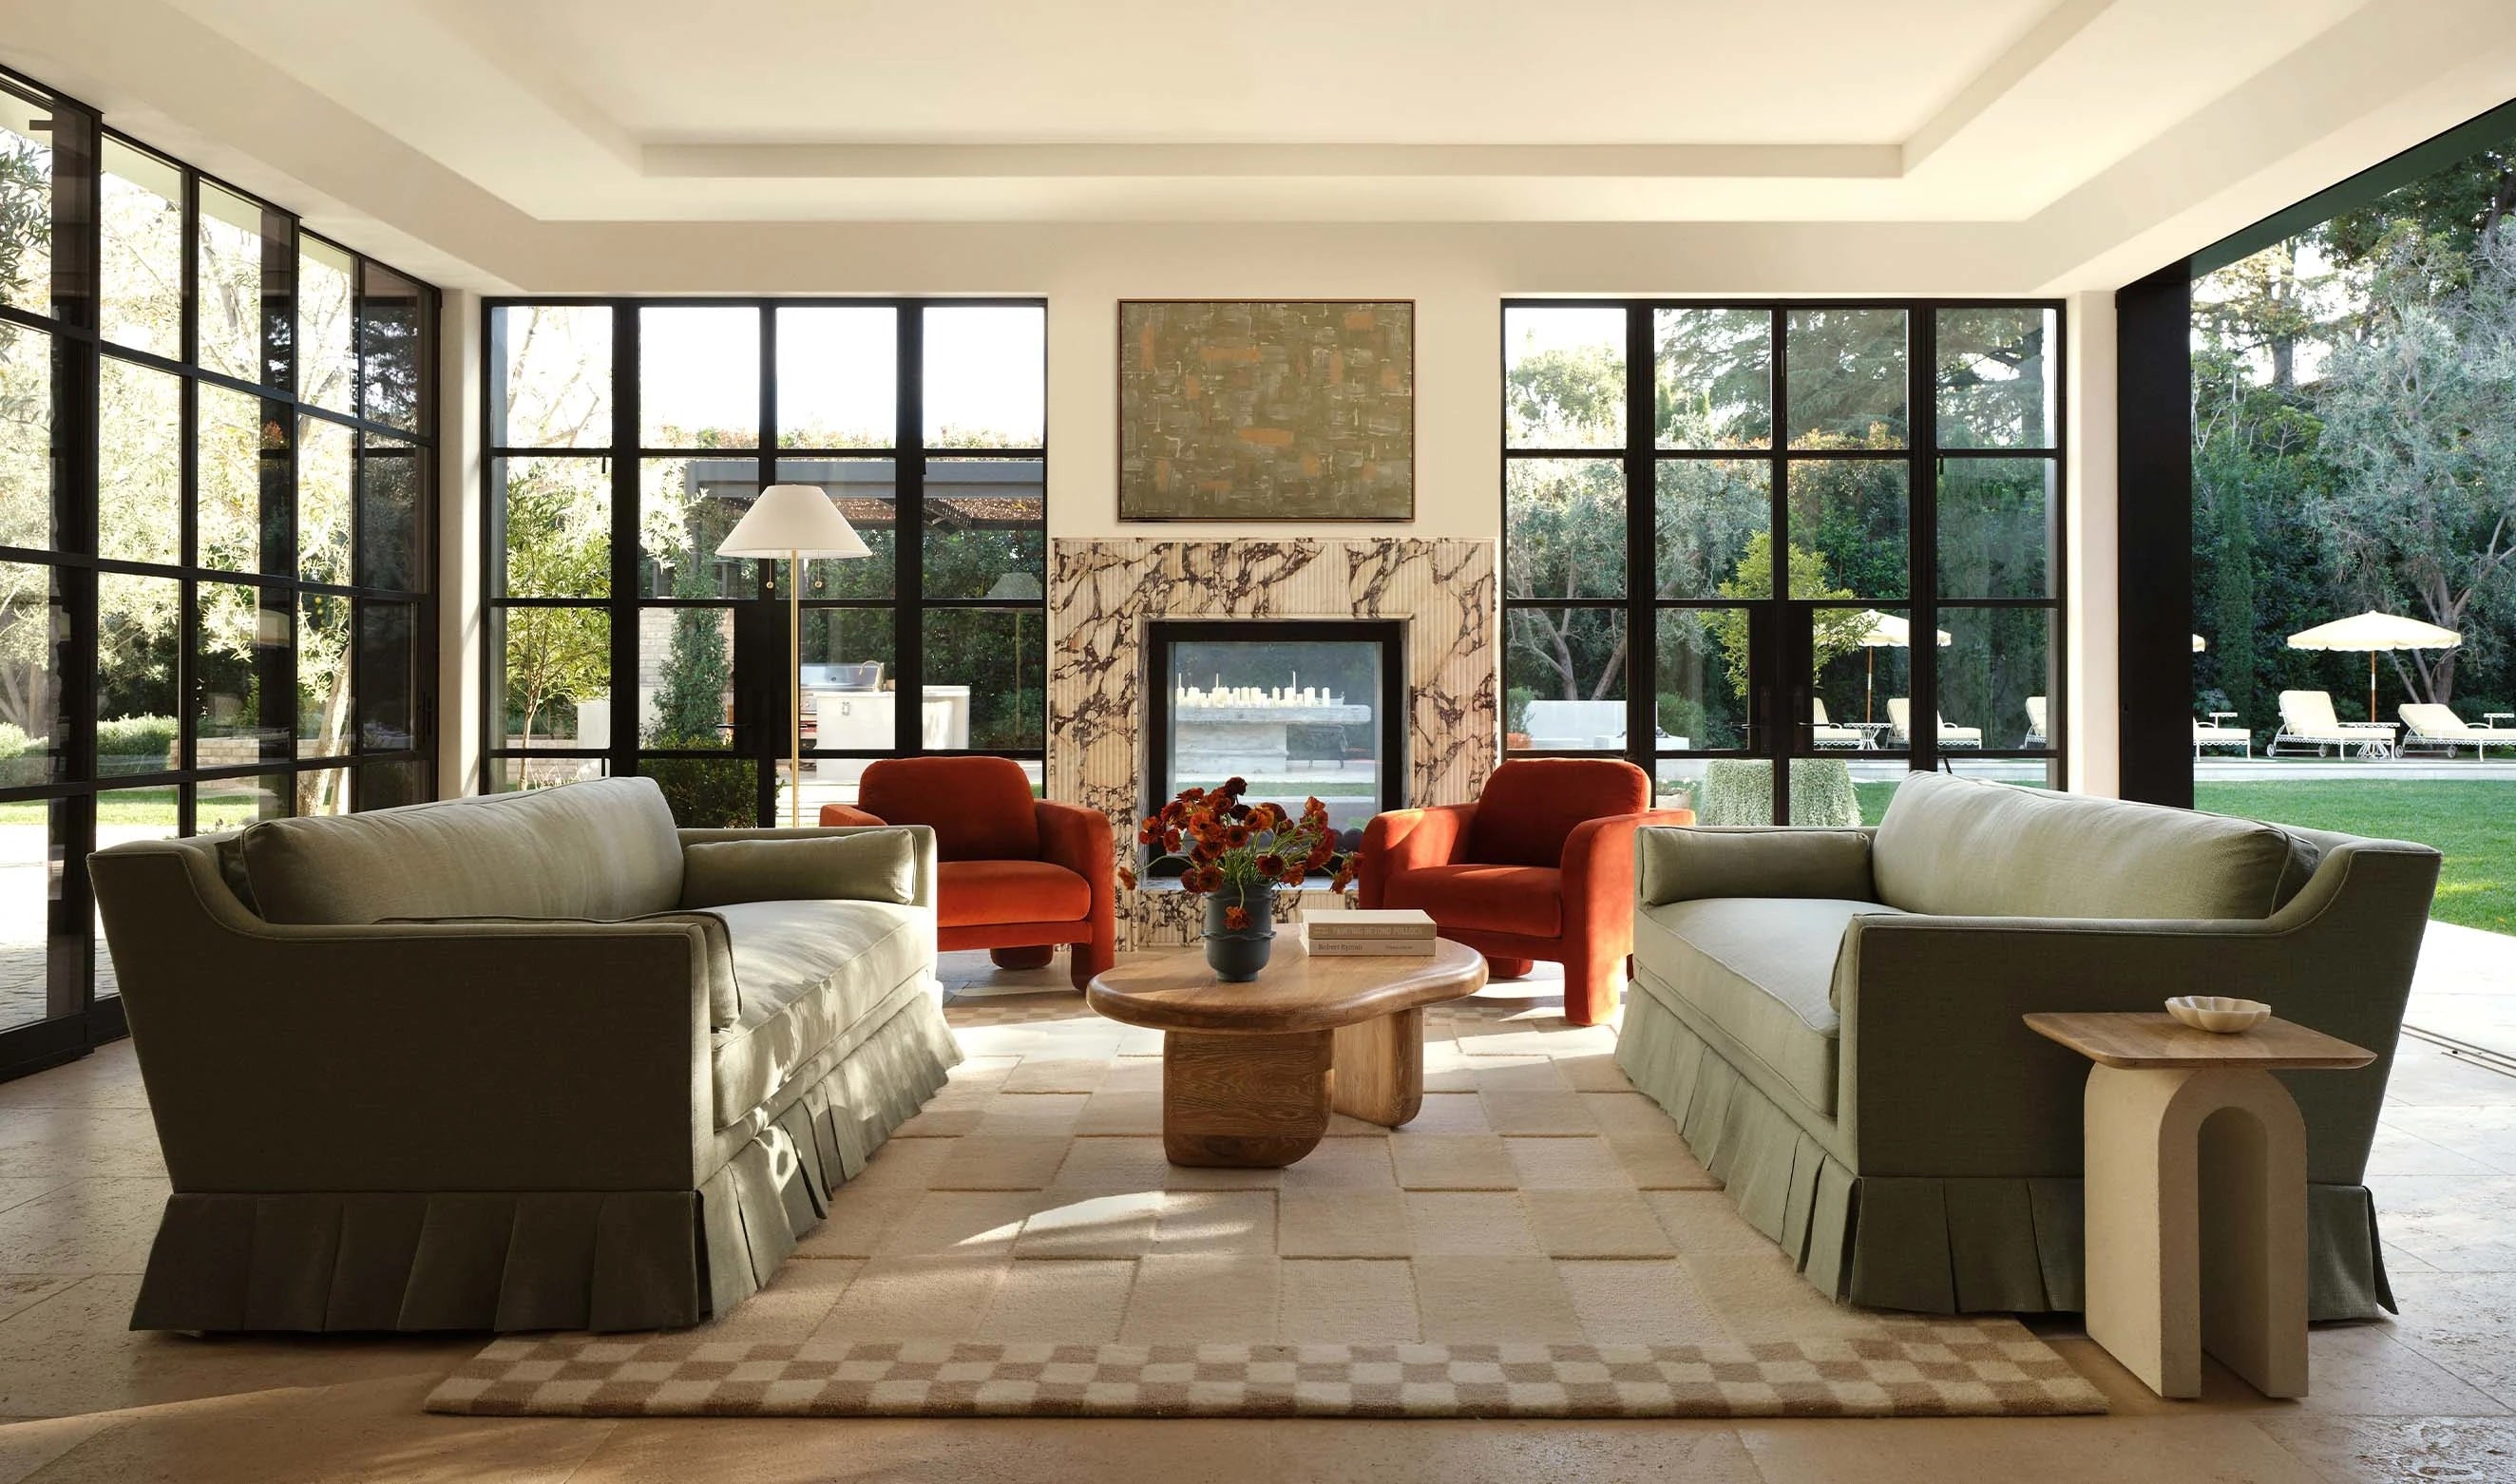 A modern, sunlit living room featuring two green couches and two red armchairs arranged around a wooden coffee table with a vase of flowers. The room has large windows, a marble fireplace, a contemporary rug, and opens up to a lush outdoor garden area.